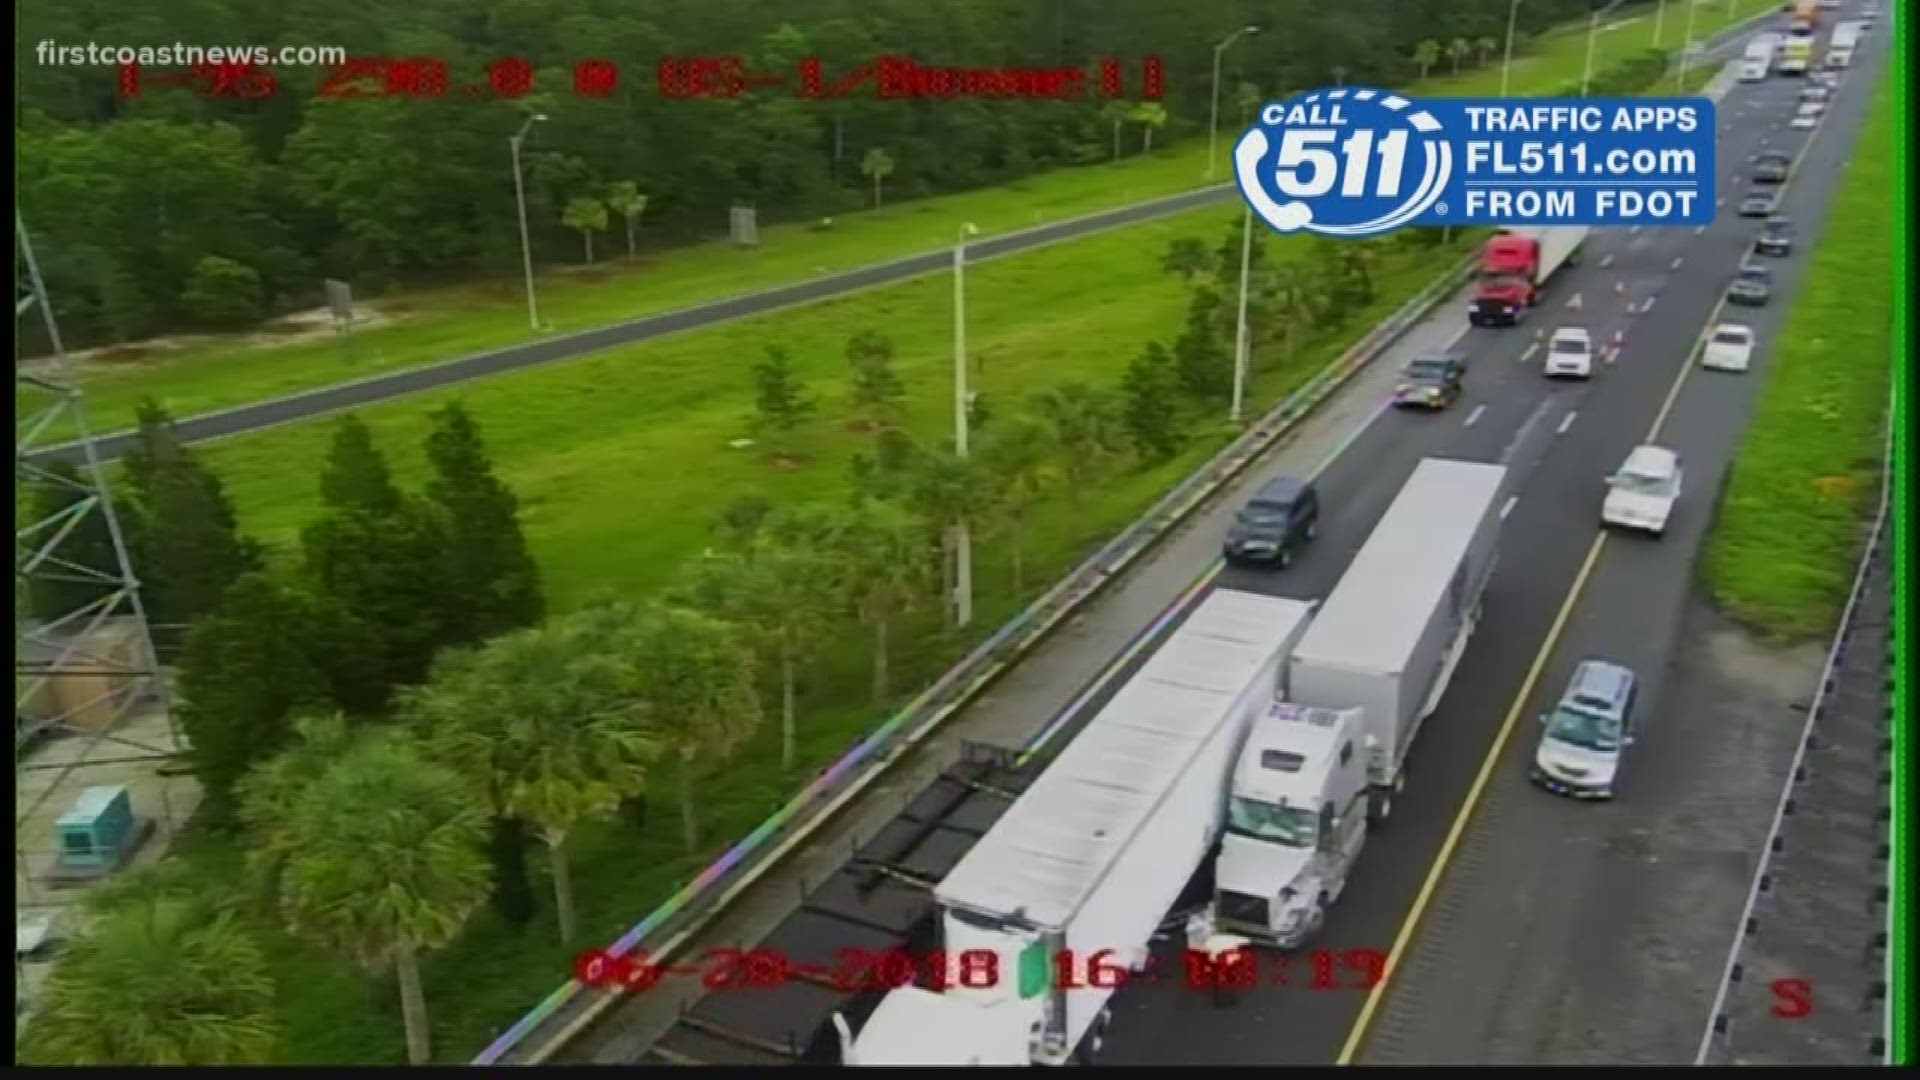 As of 5 p.m., two lanes were blocked on I-95.